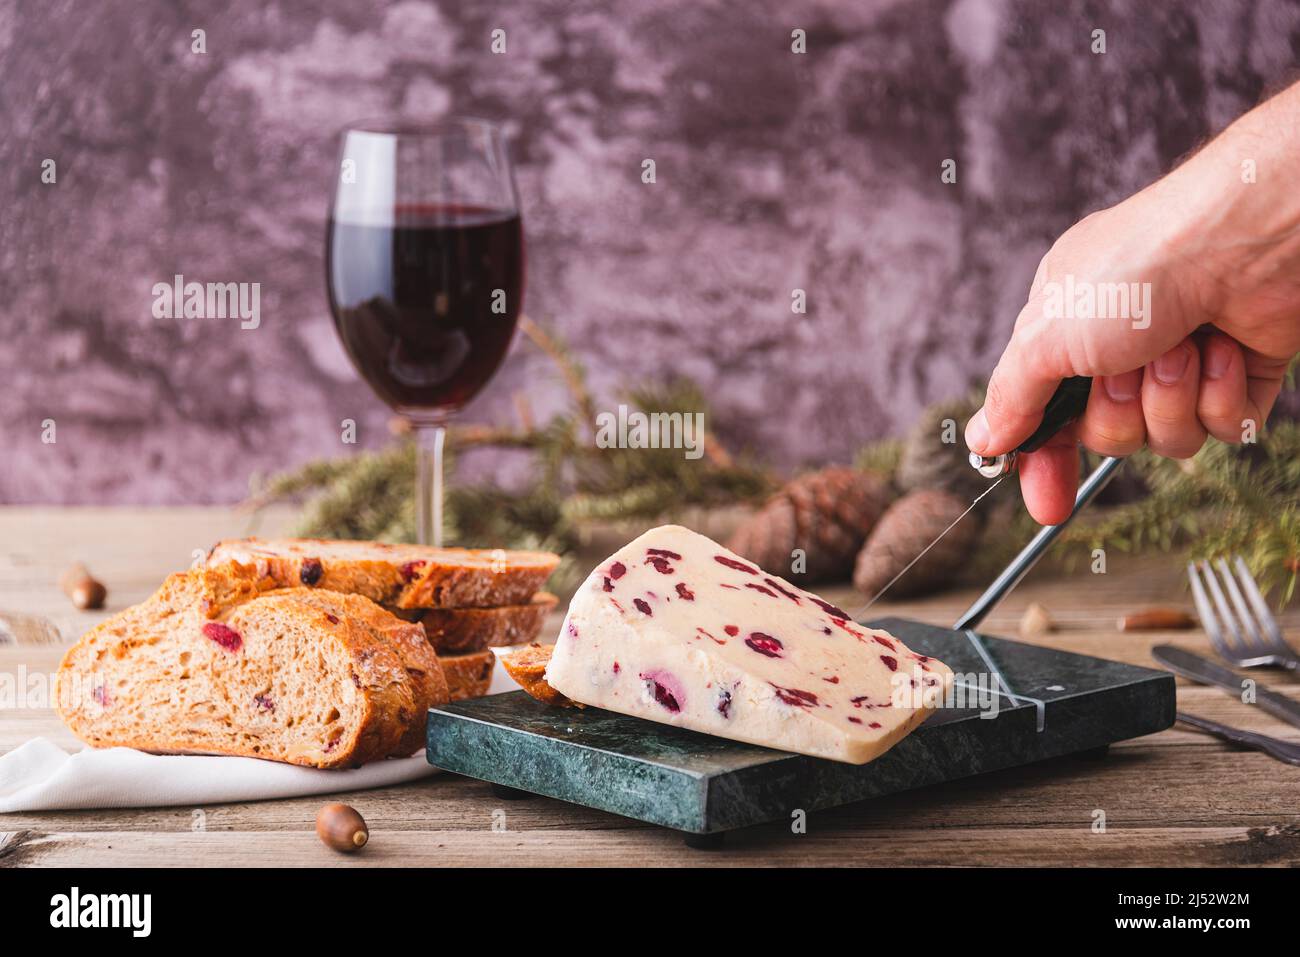 Wensleydale cheese with cranberries on a marble cheese cutting table. Stock Photo